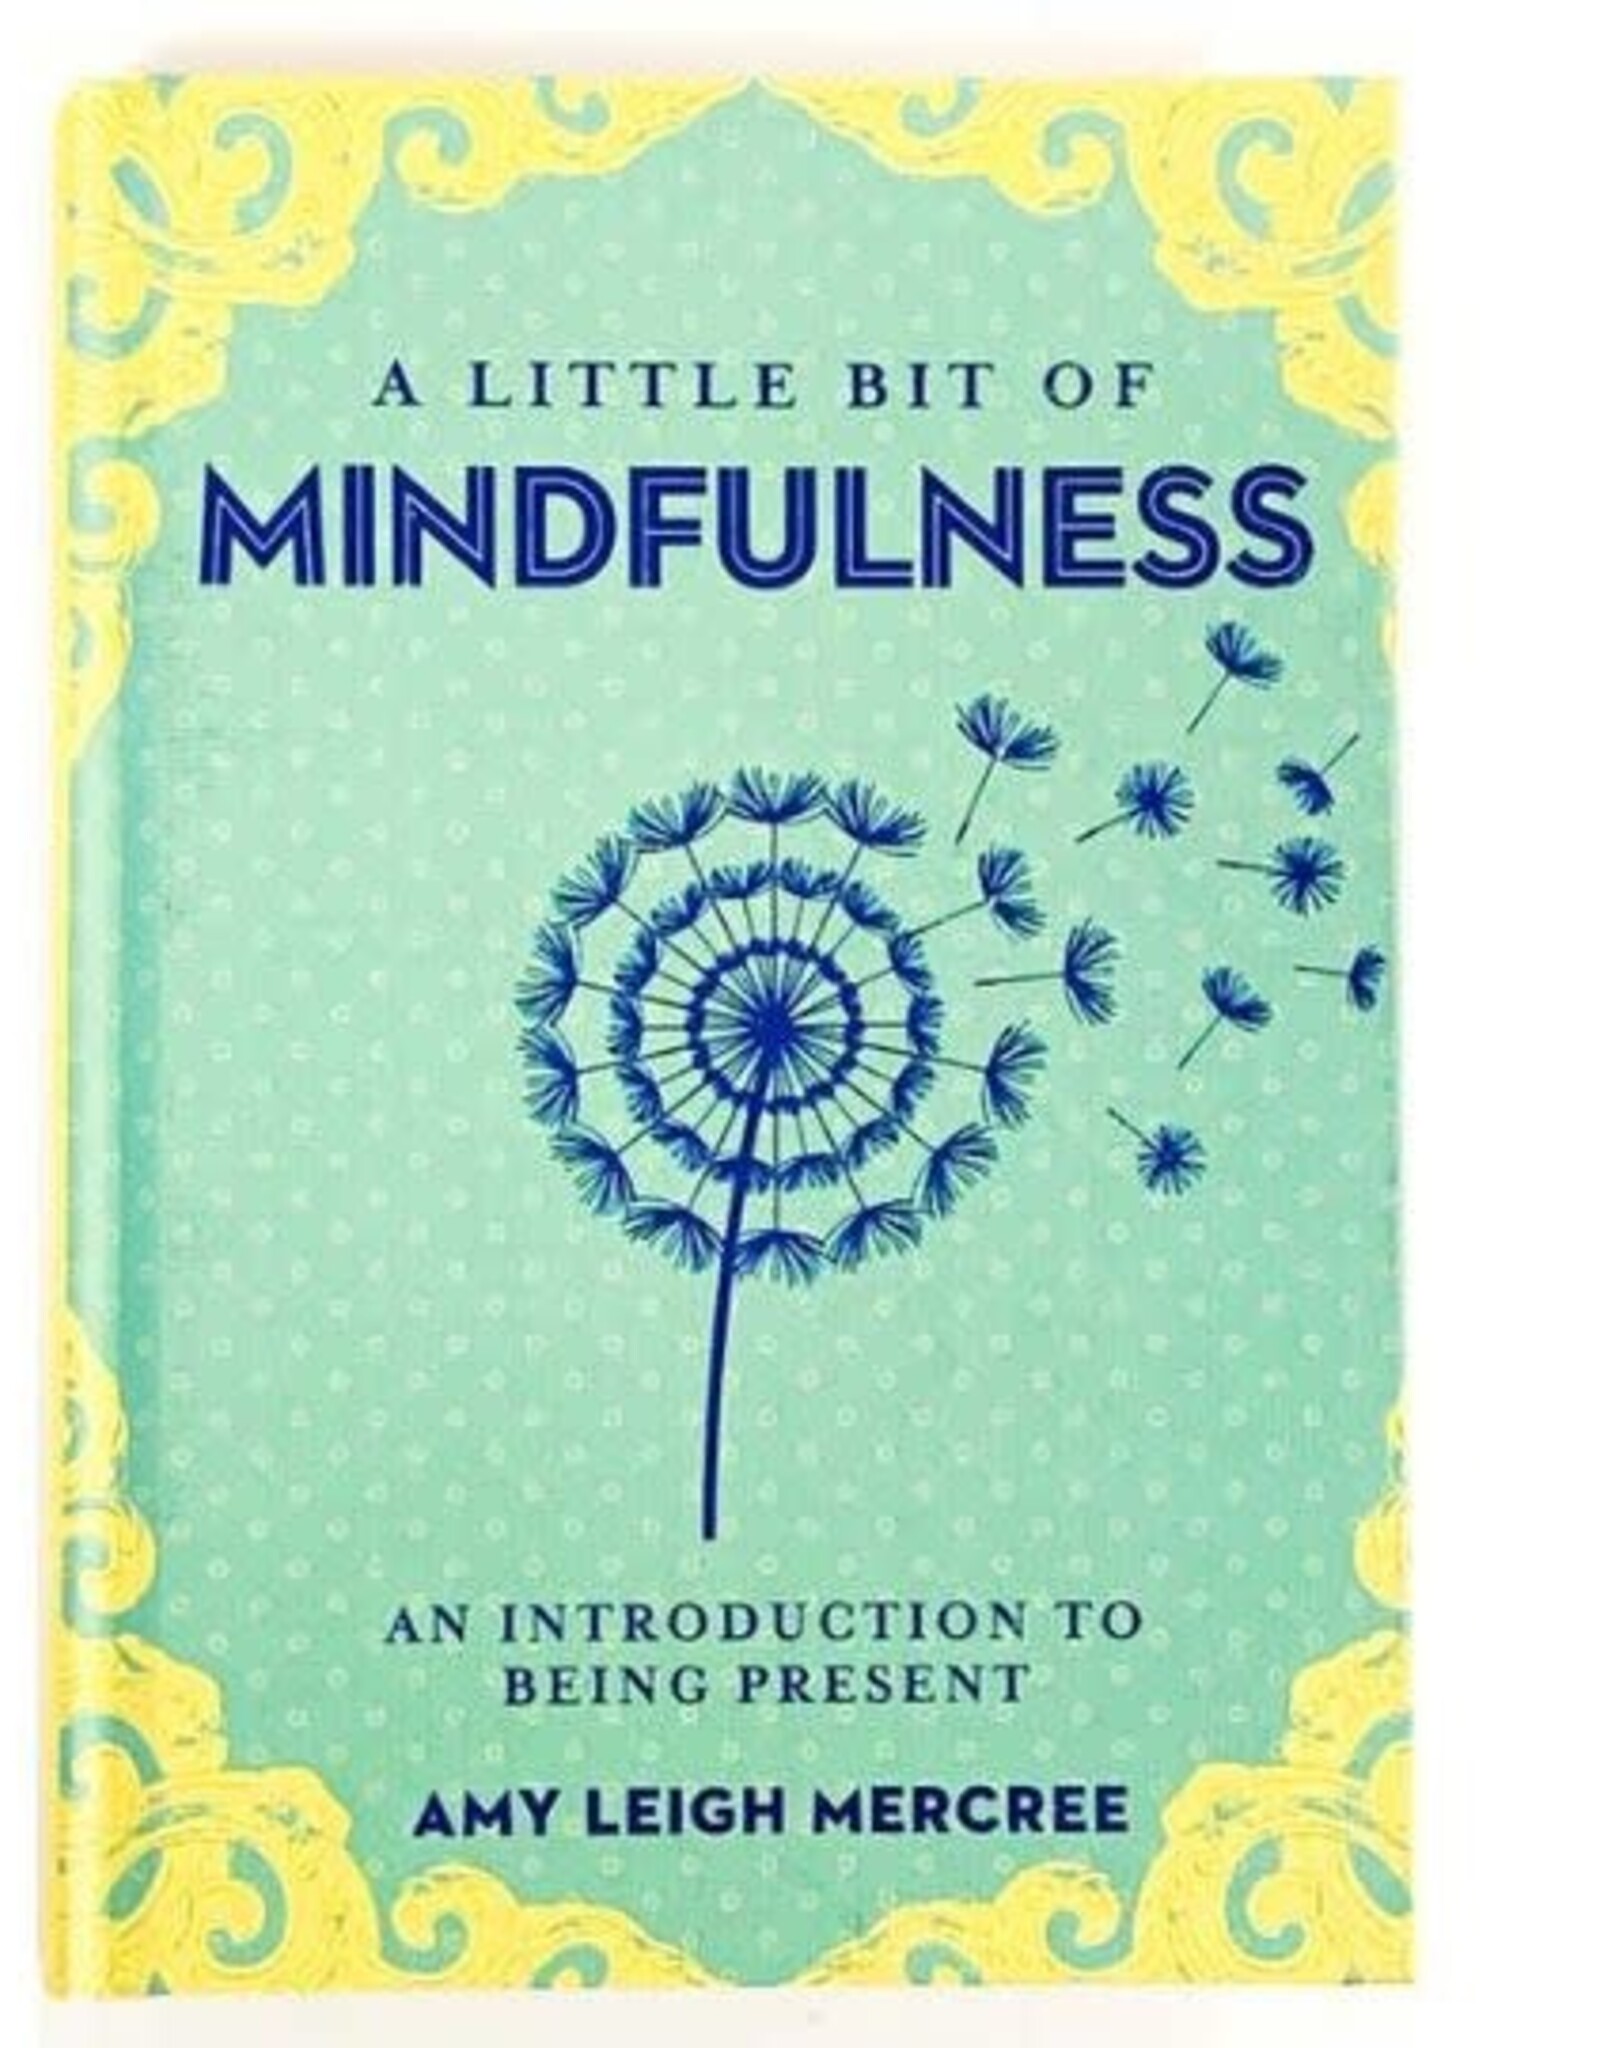 Amy Leigh Mercree A Little Bit of Mindfulness by Amy Leigh Mercree